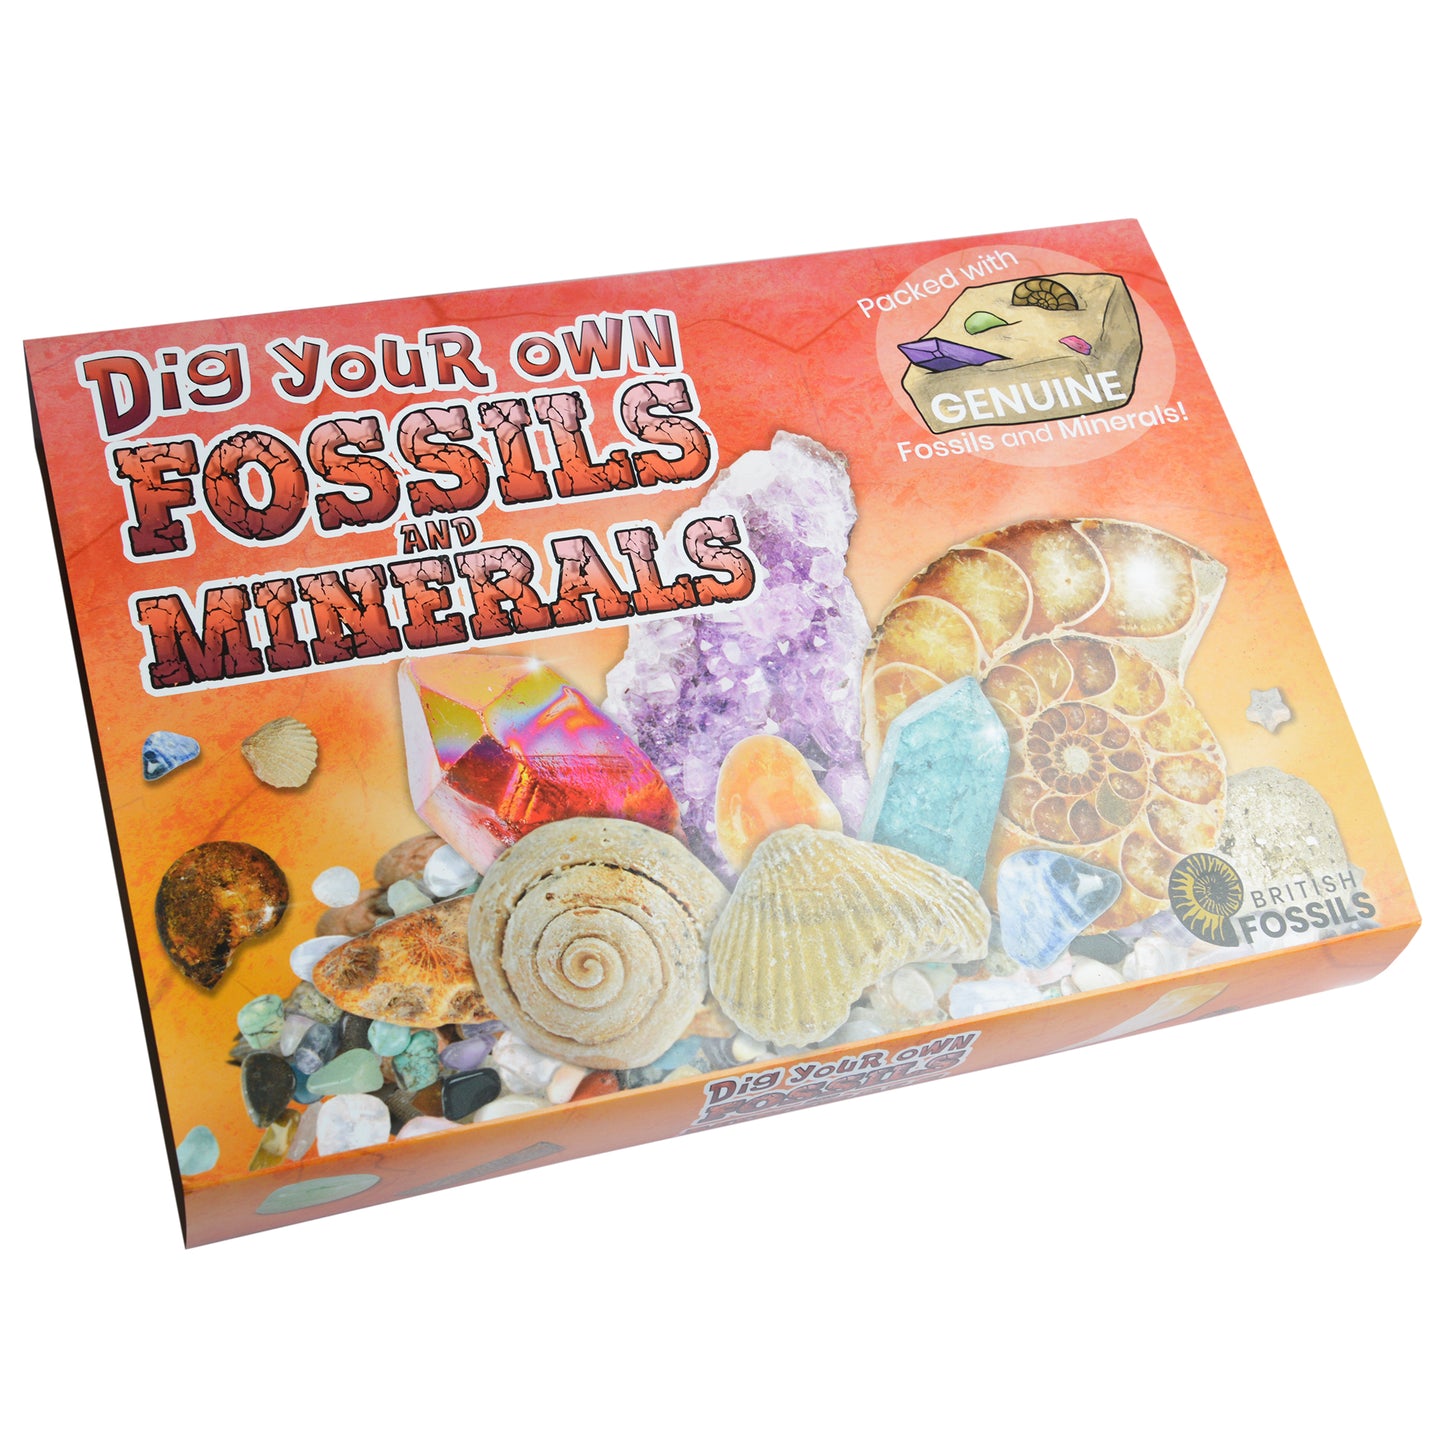 Dig your own Fossils and Minerals